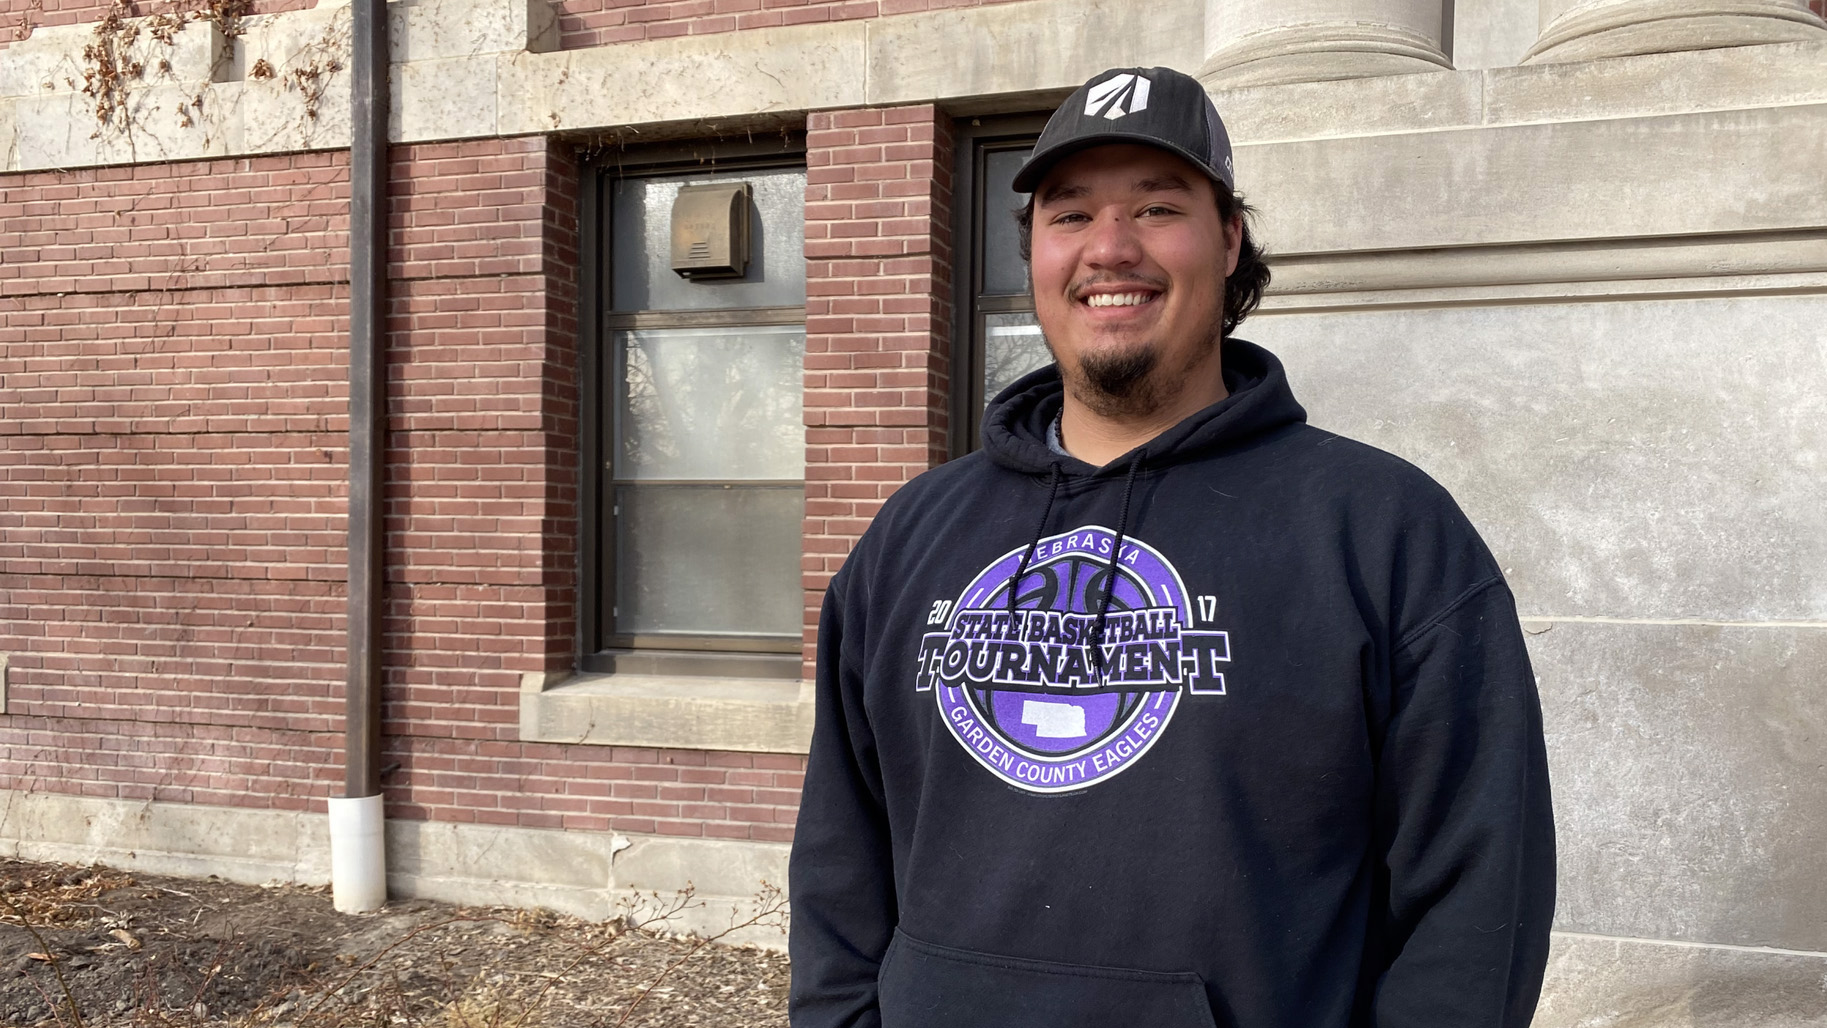 Noah Lake of Oshkosh will graduate this month with an associate degree in Diversified Agriculture. (Bassett / NCTA News)